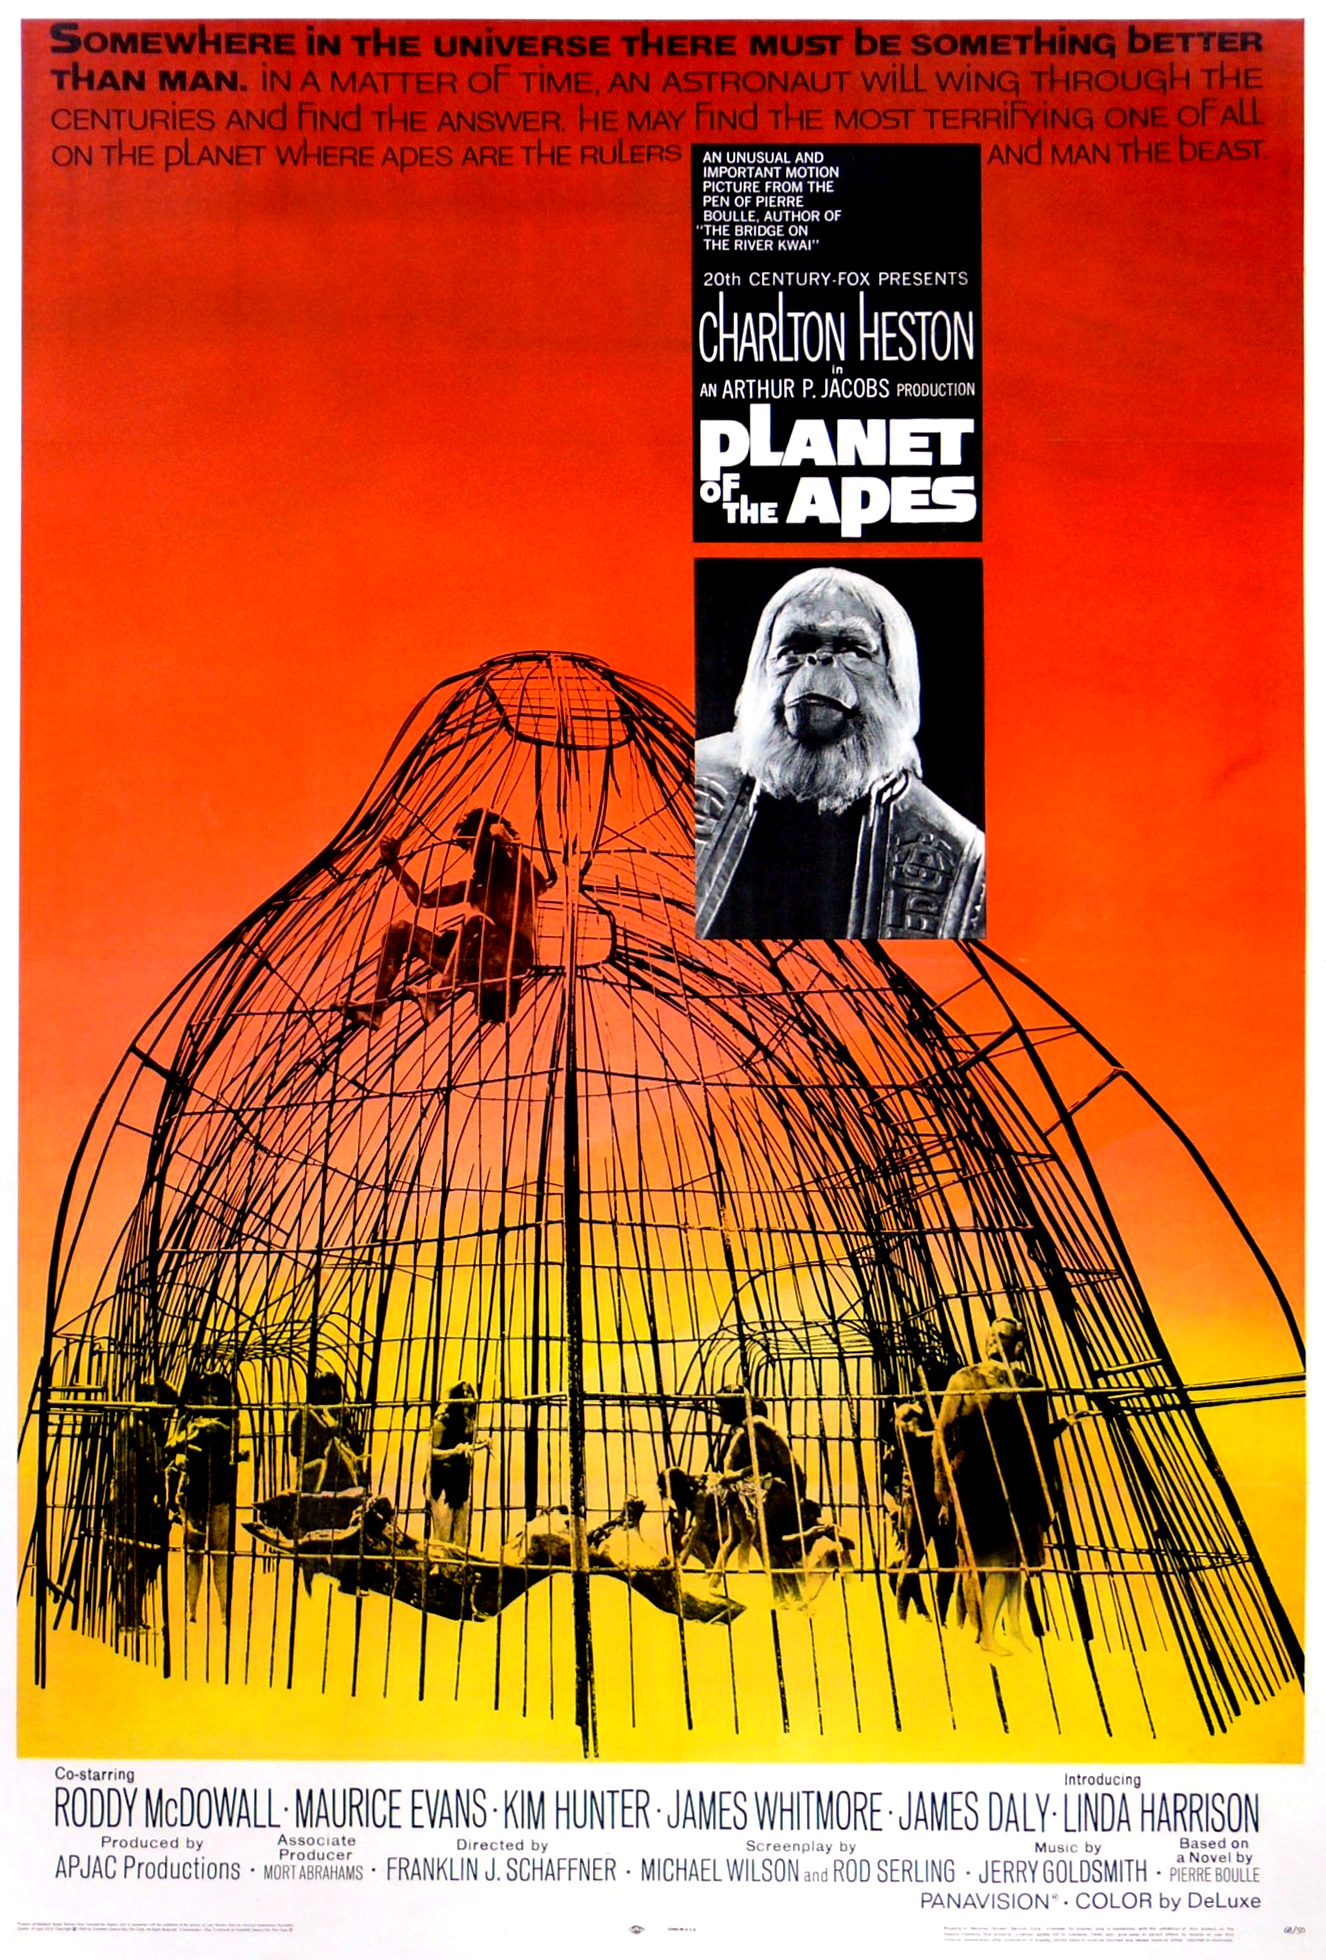 Graphic poster for The Planet of the Apes 1968